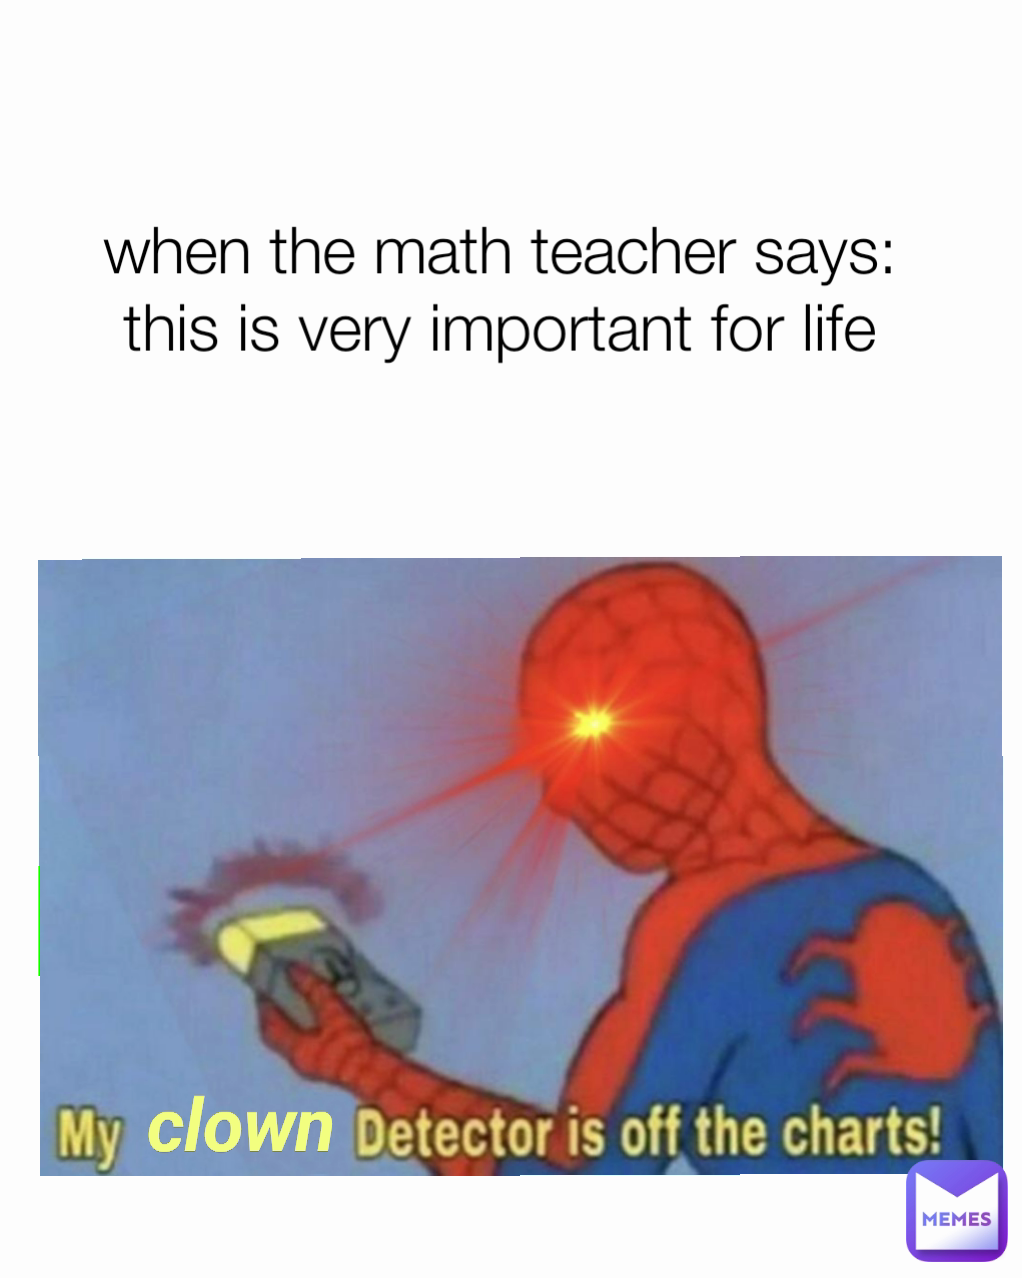 when the math teacher says: this is very important for life

 clown
